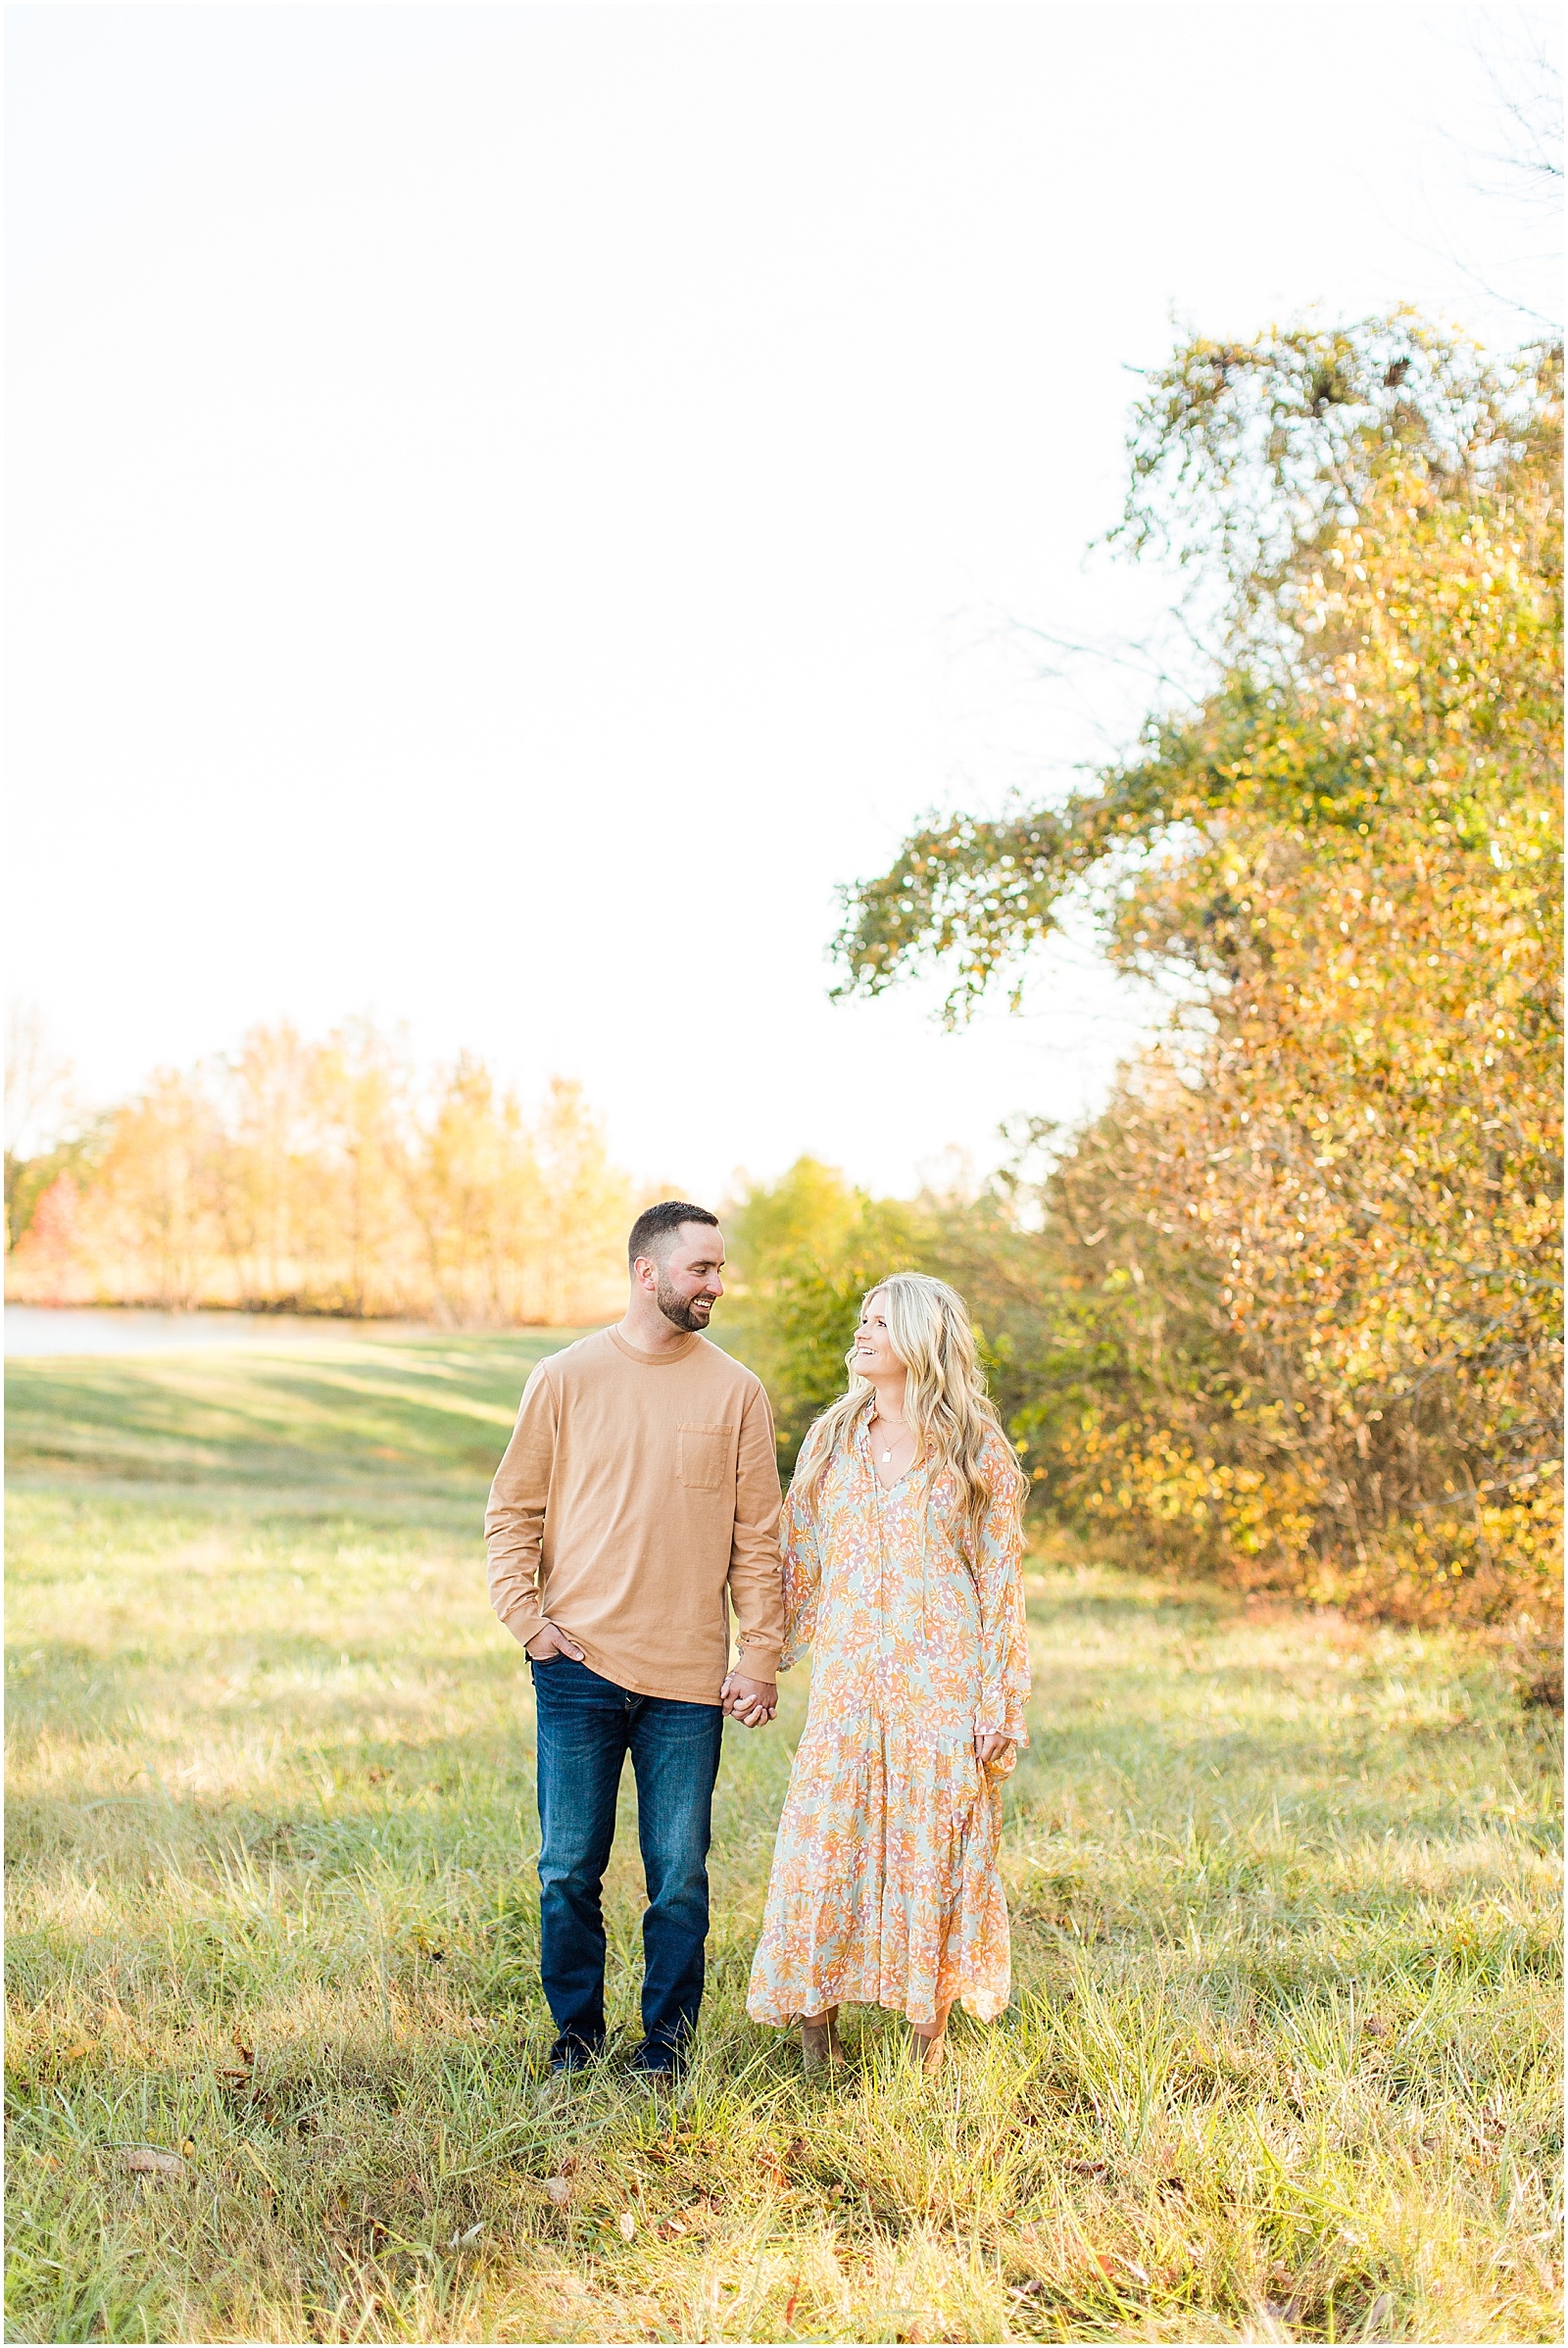 A Southern Indiana Engagement Session | Charleston and Erin | Bret and Brandie Photography006.jpg